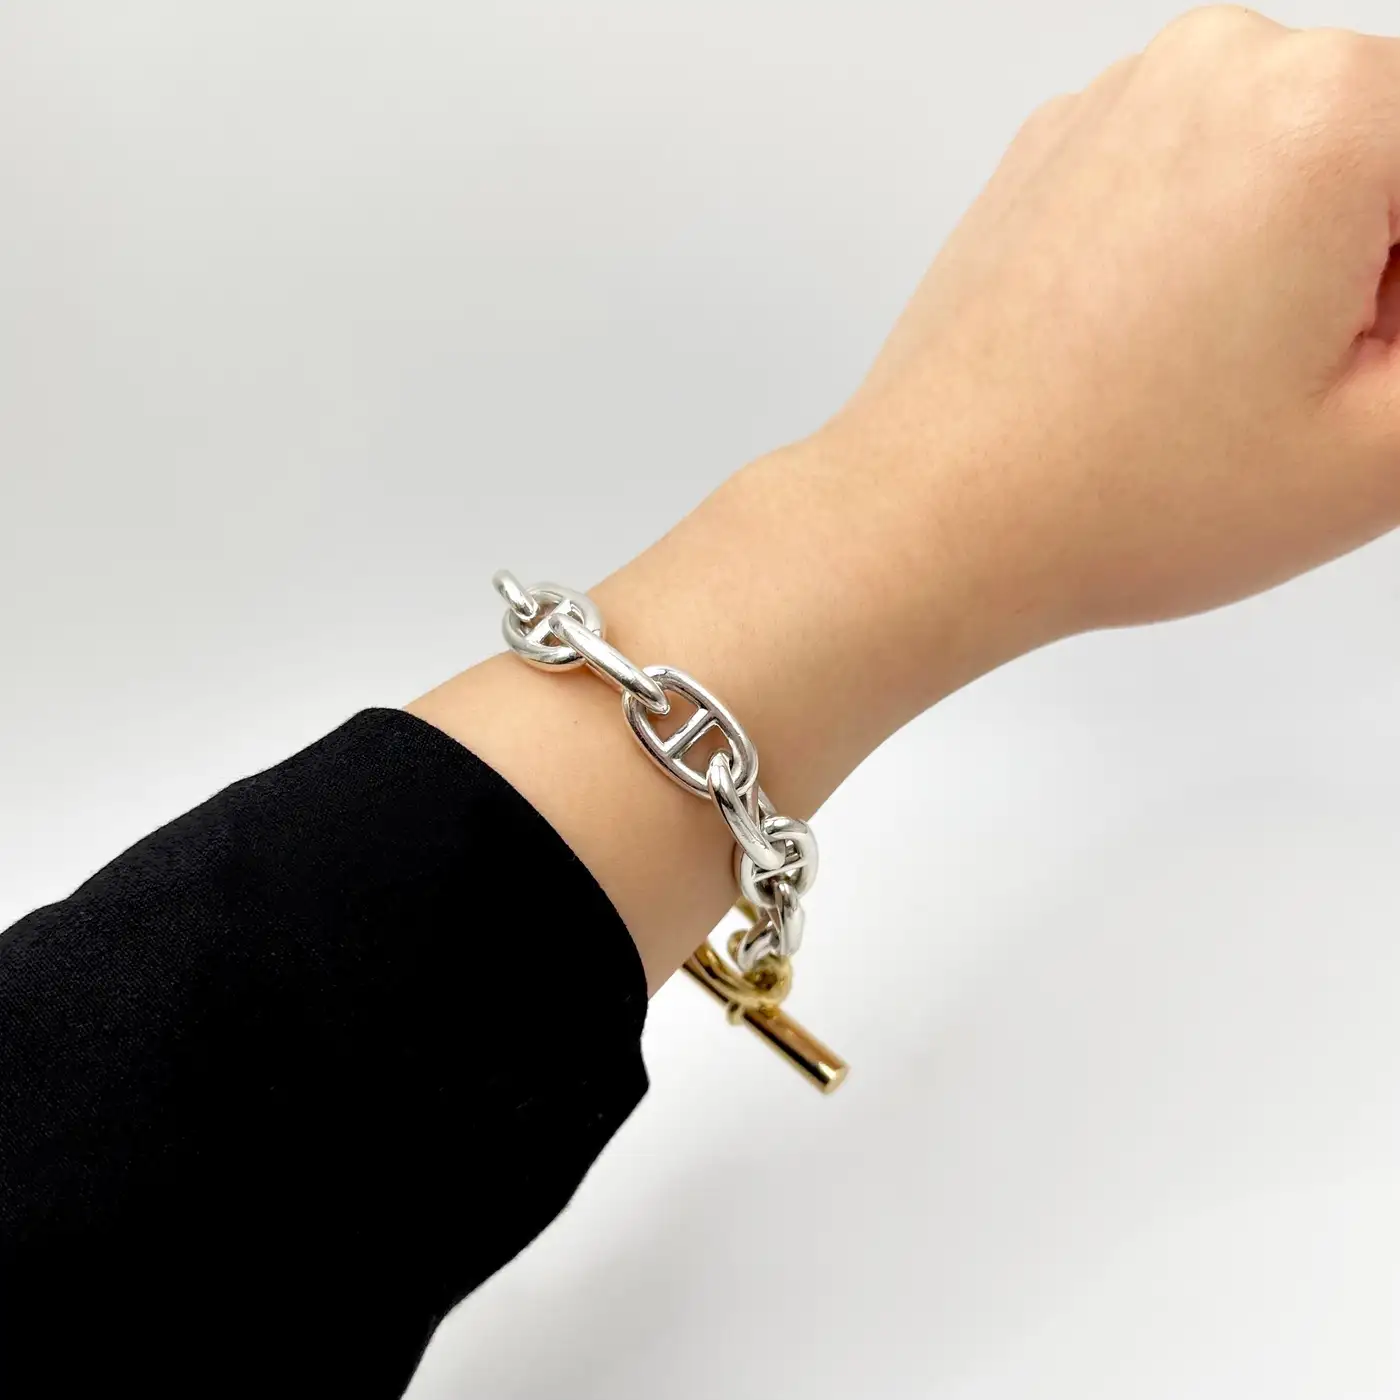 Hermes-Chaine-dAncre-Silver-and-Gold-Bracelet-3.webp